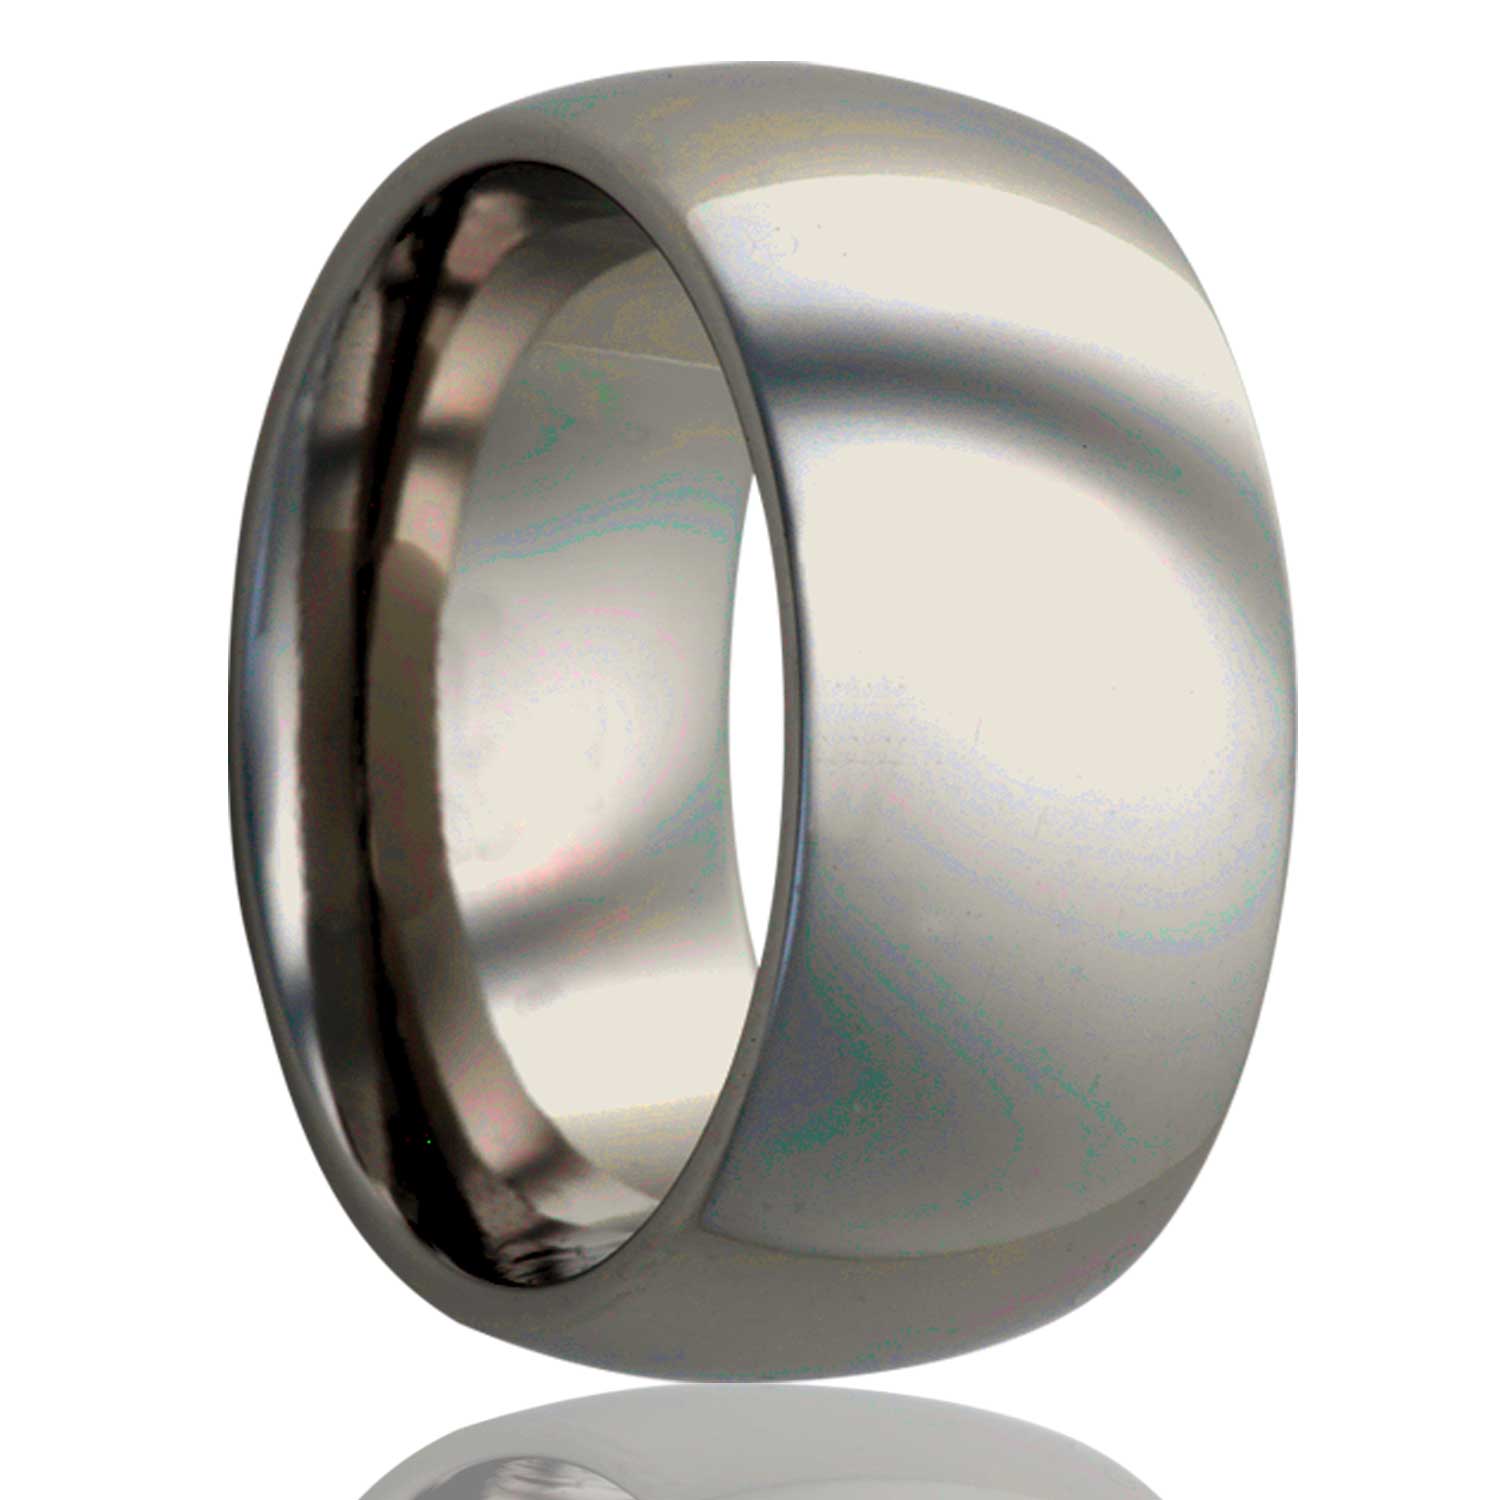 A domed titanium wedding band displayed on a neutral white background.